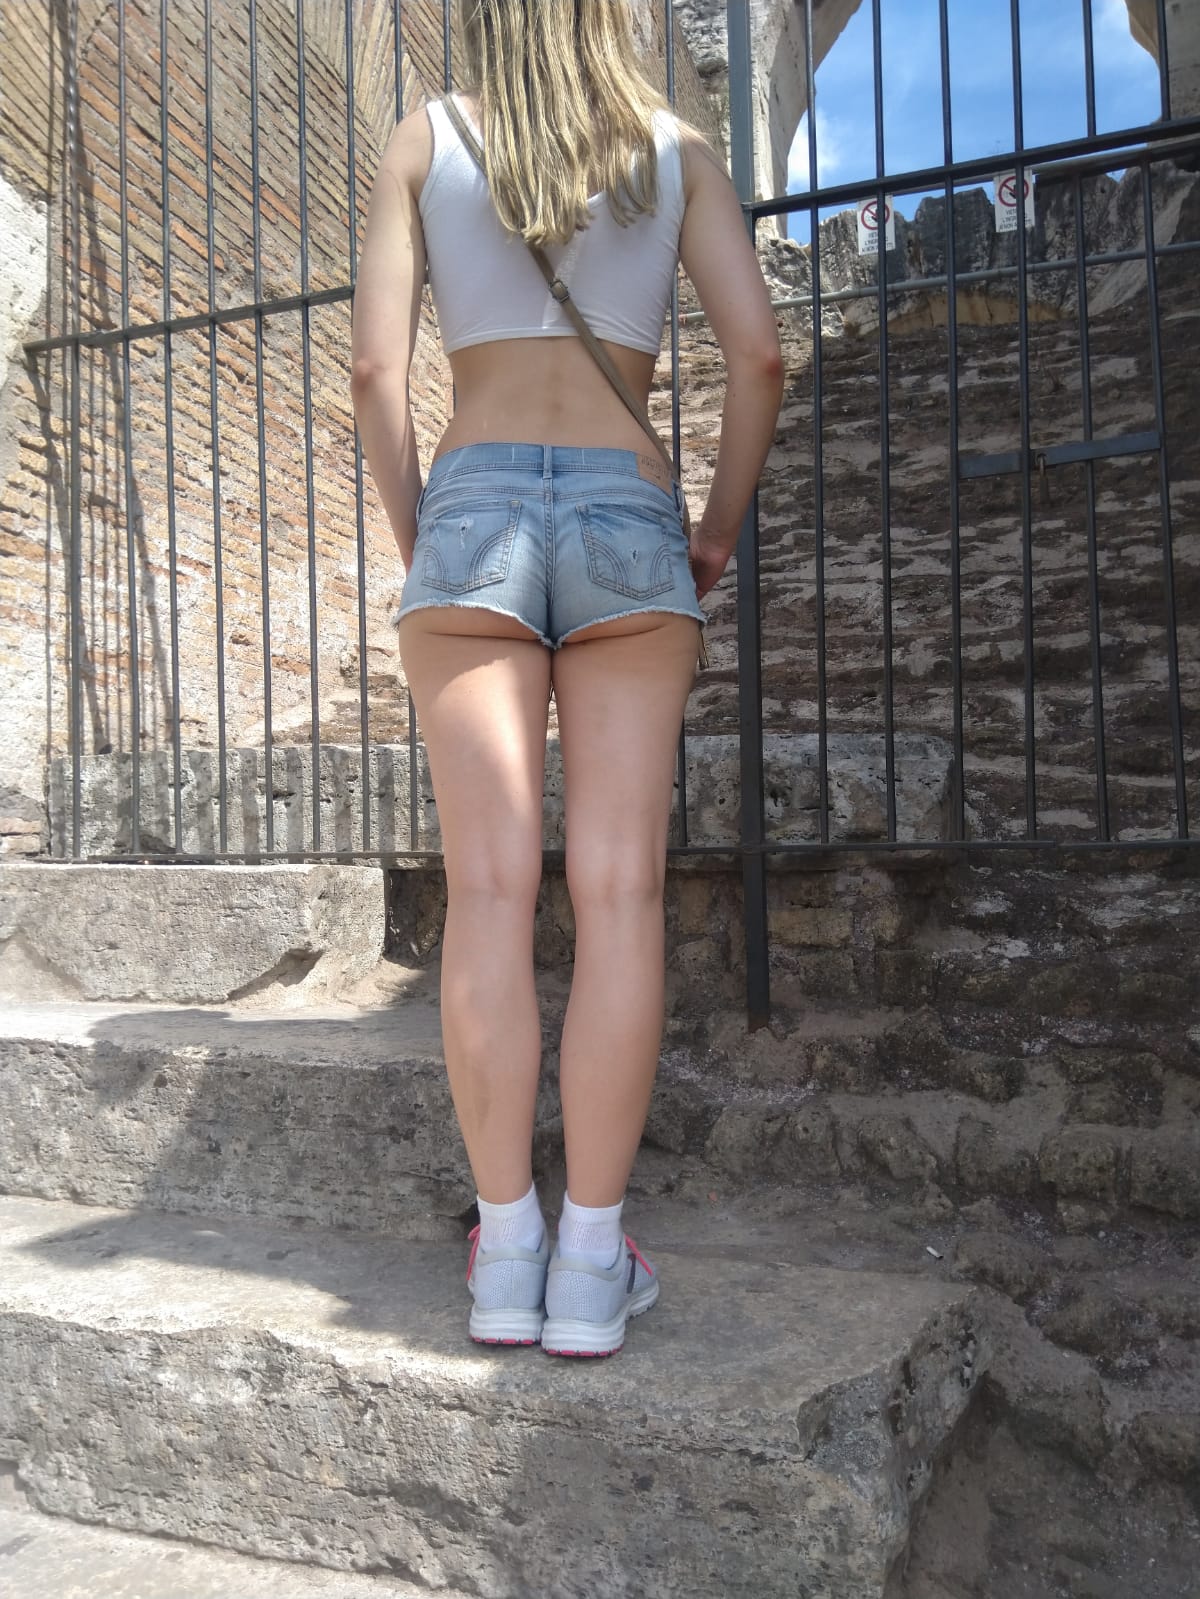 Teen Short Shorts - Short shorts are [f]un when out sightseeing! Porn Pic - EPORNER